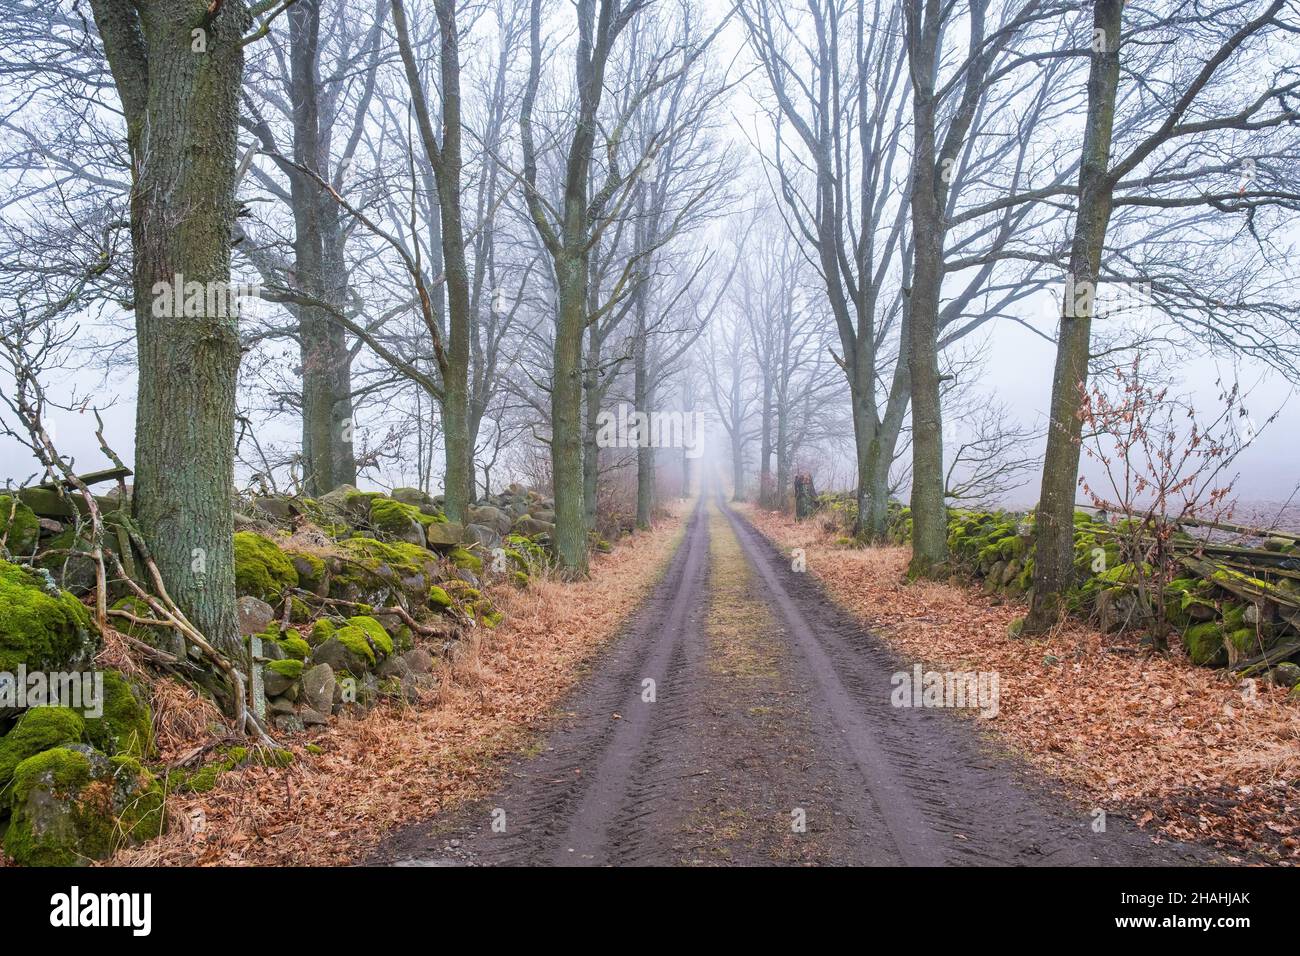 Tree Lined Dirt Road With Fog In The Countryside Stock Photo Alamy